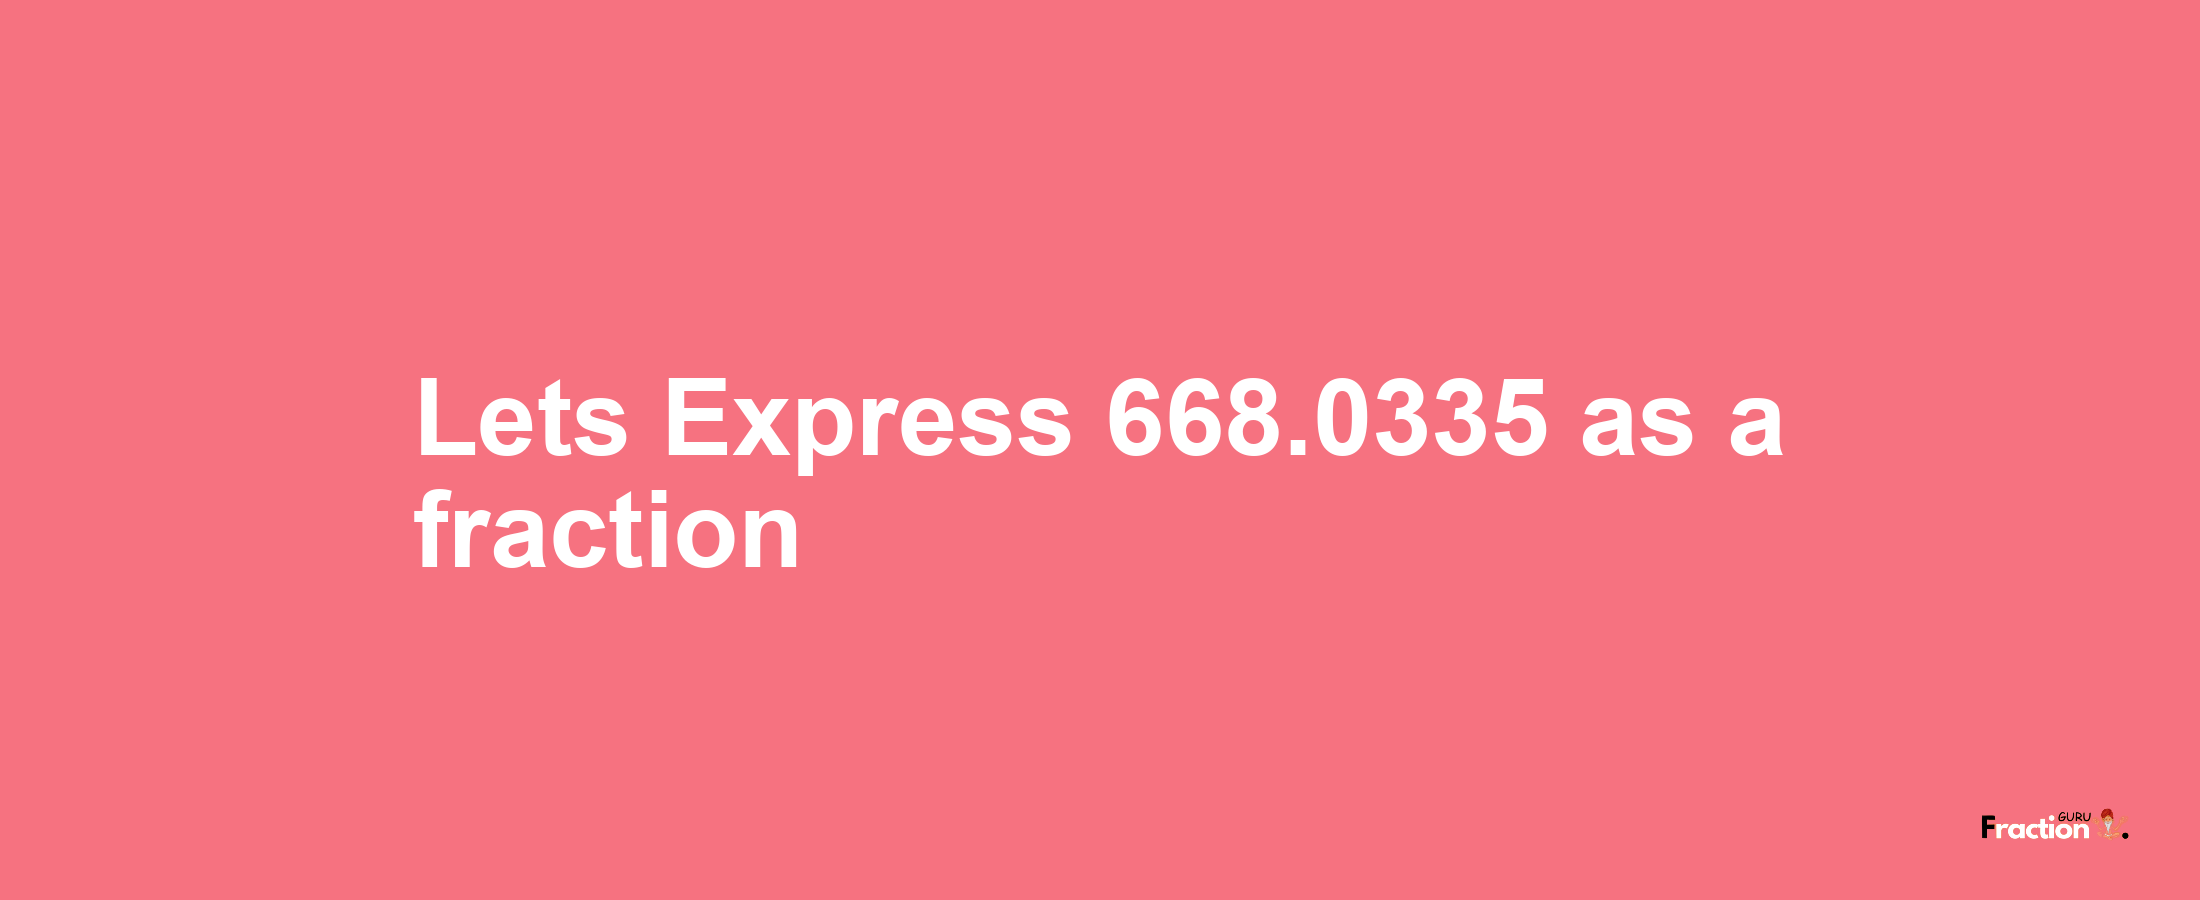 Lets Express 668.0335 as afraction